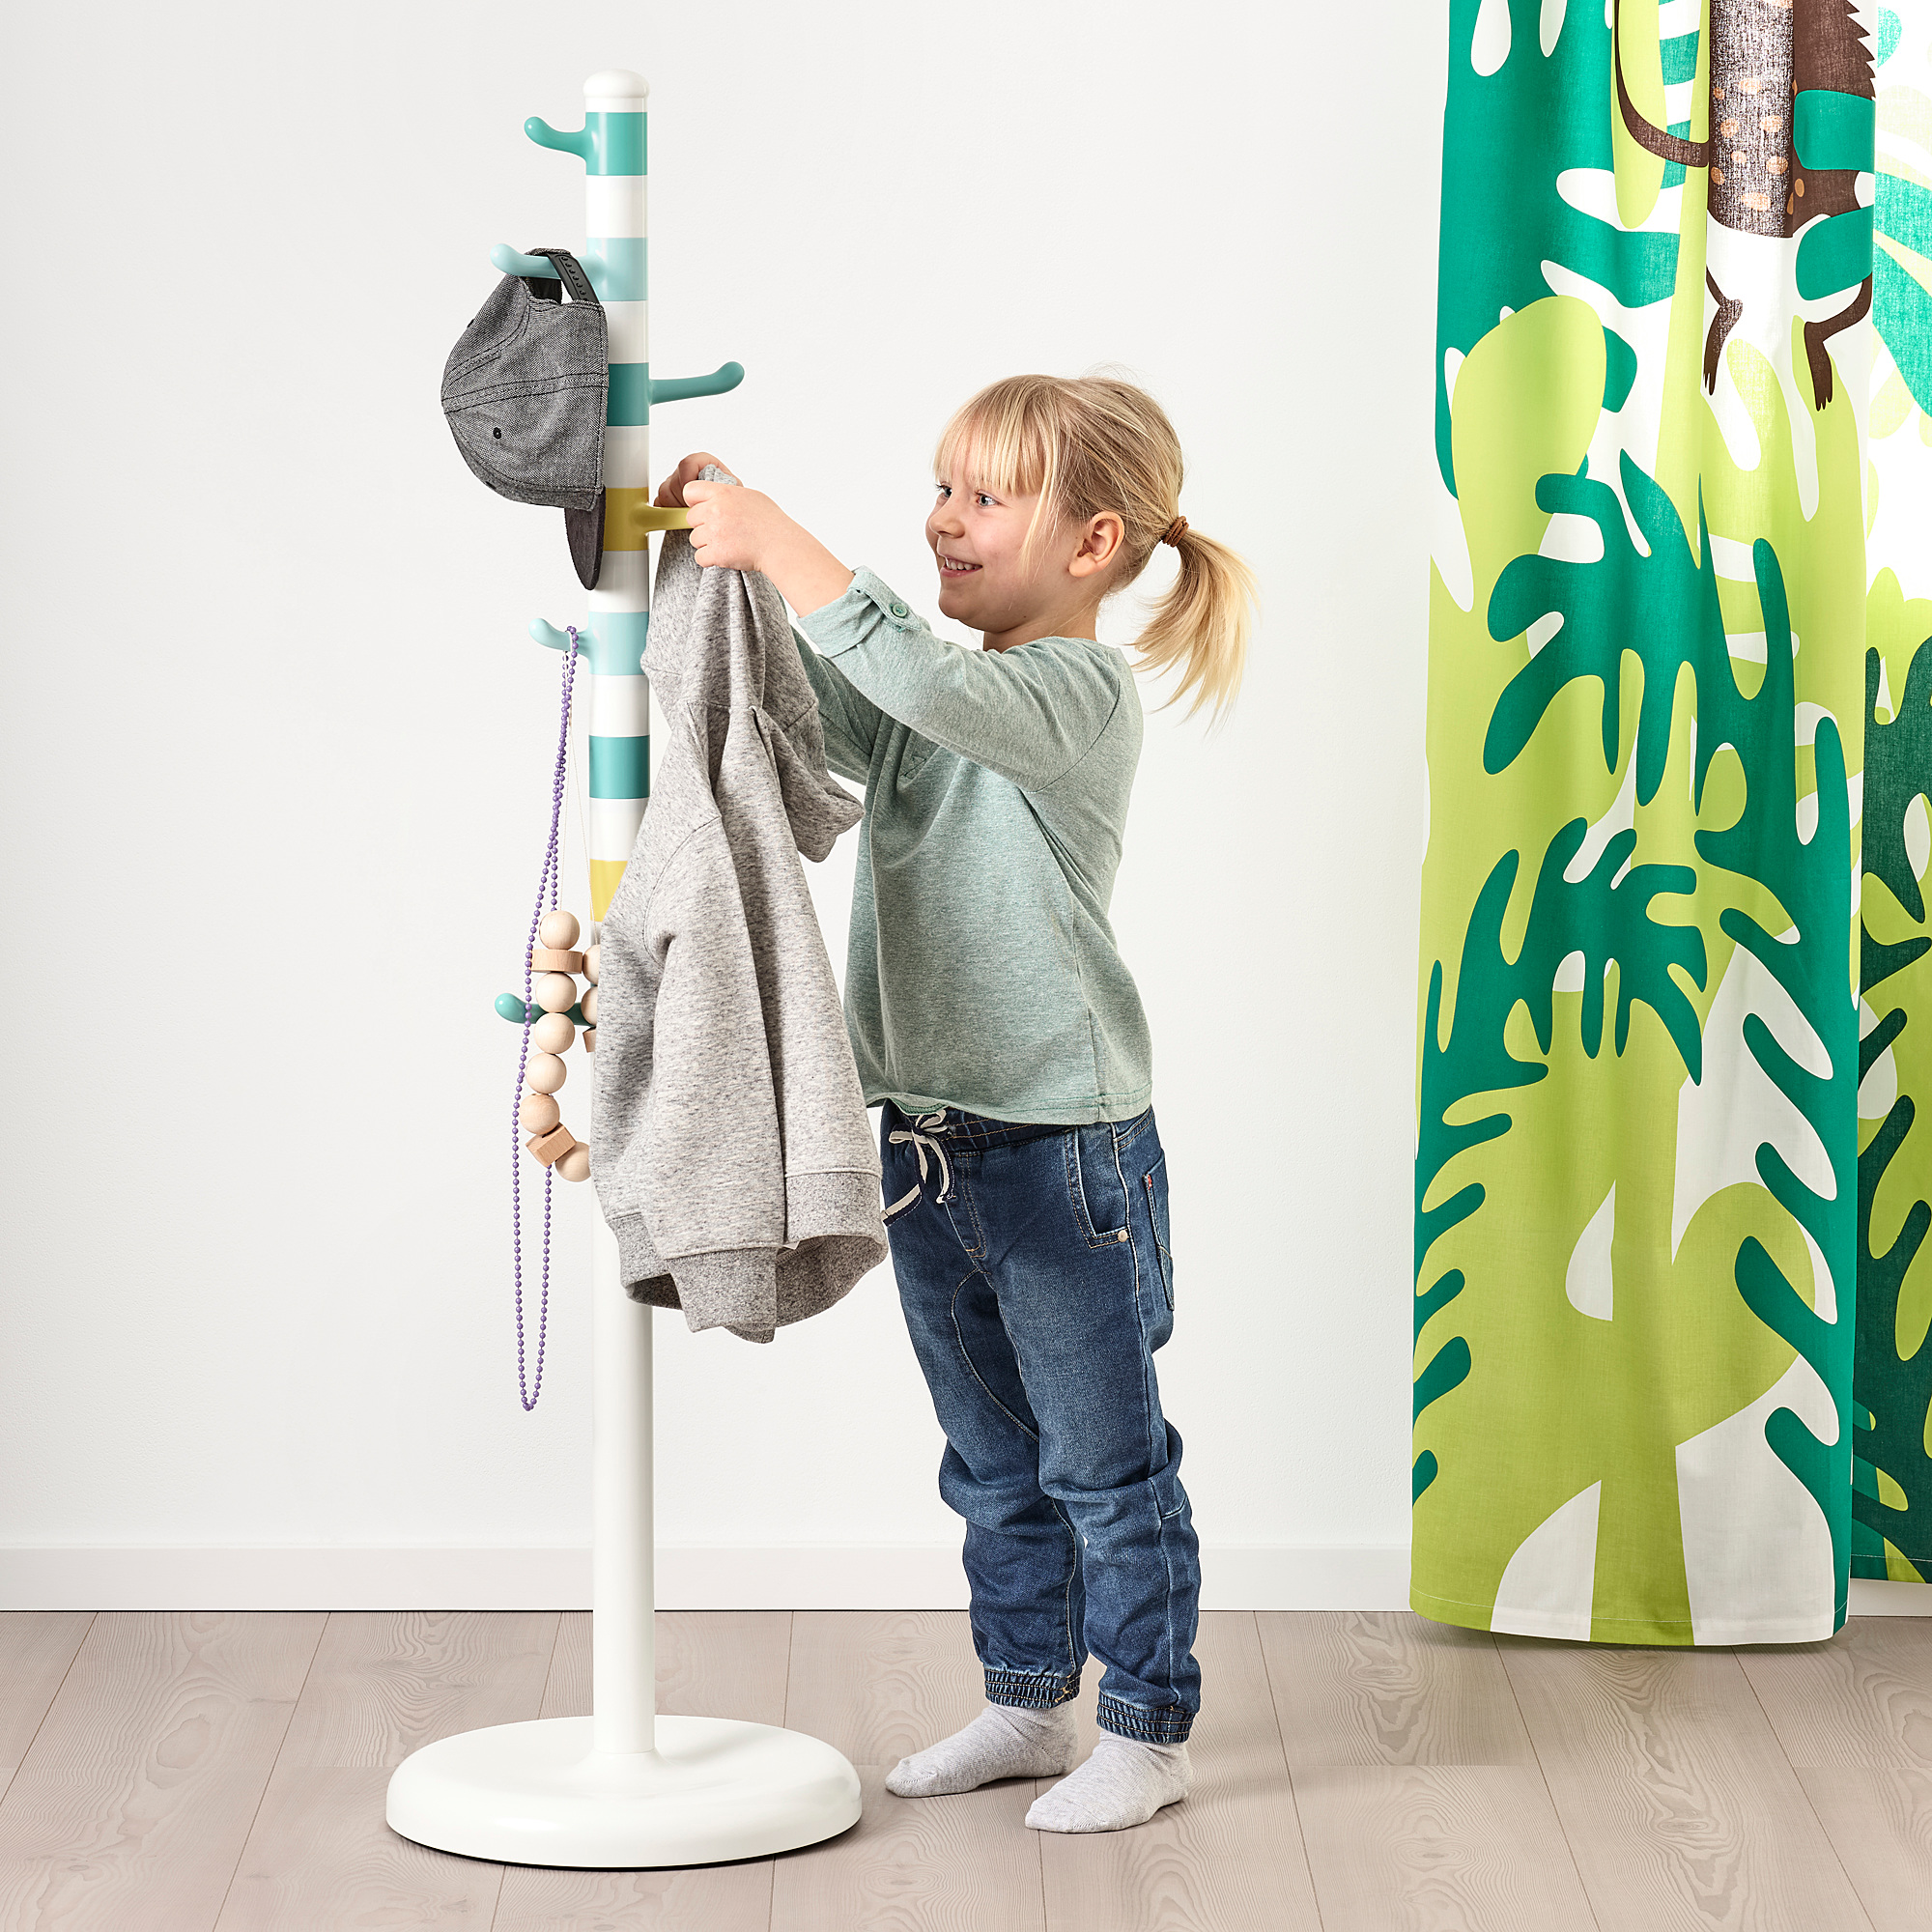 KROKIG clothes stand